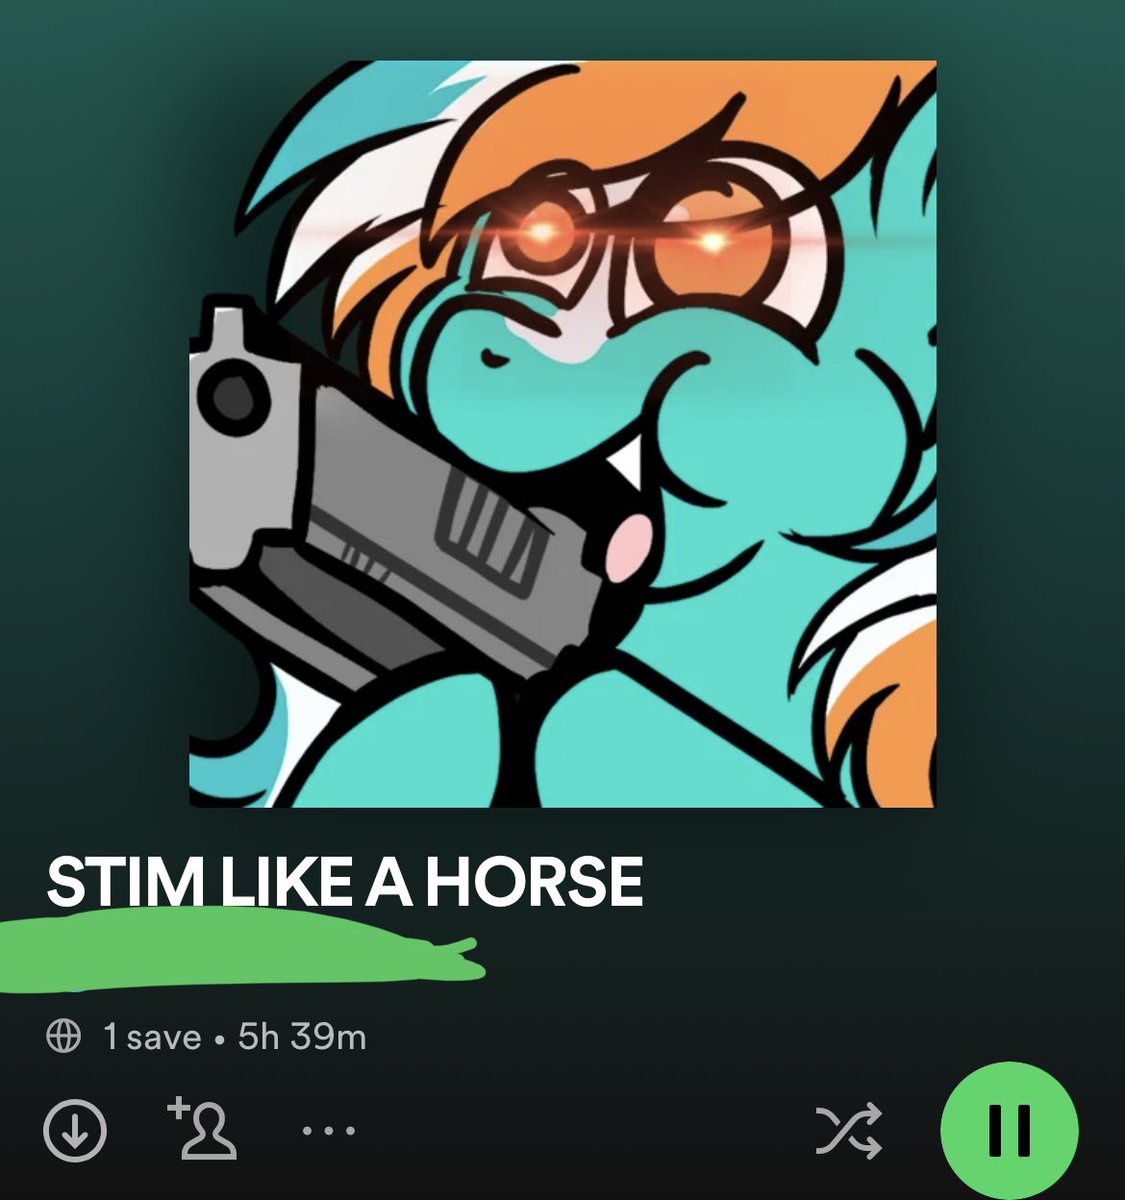 Lmao some friends were making stimming playlists so of course I joined in and added my own twist to it :p